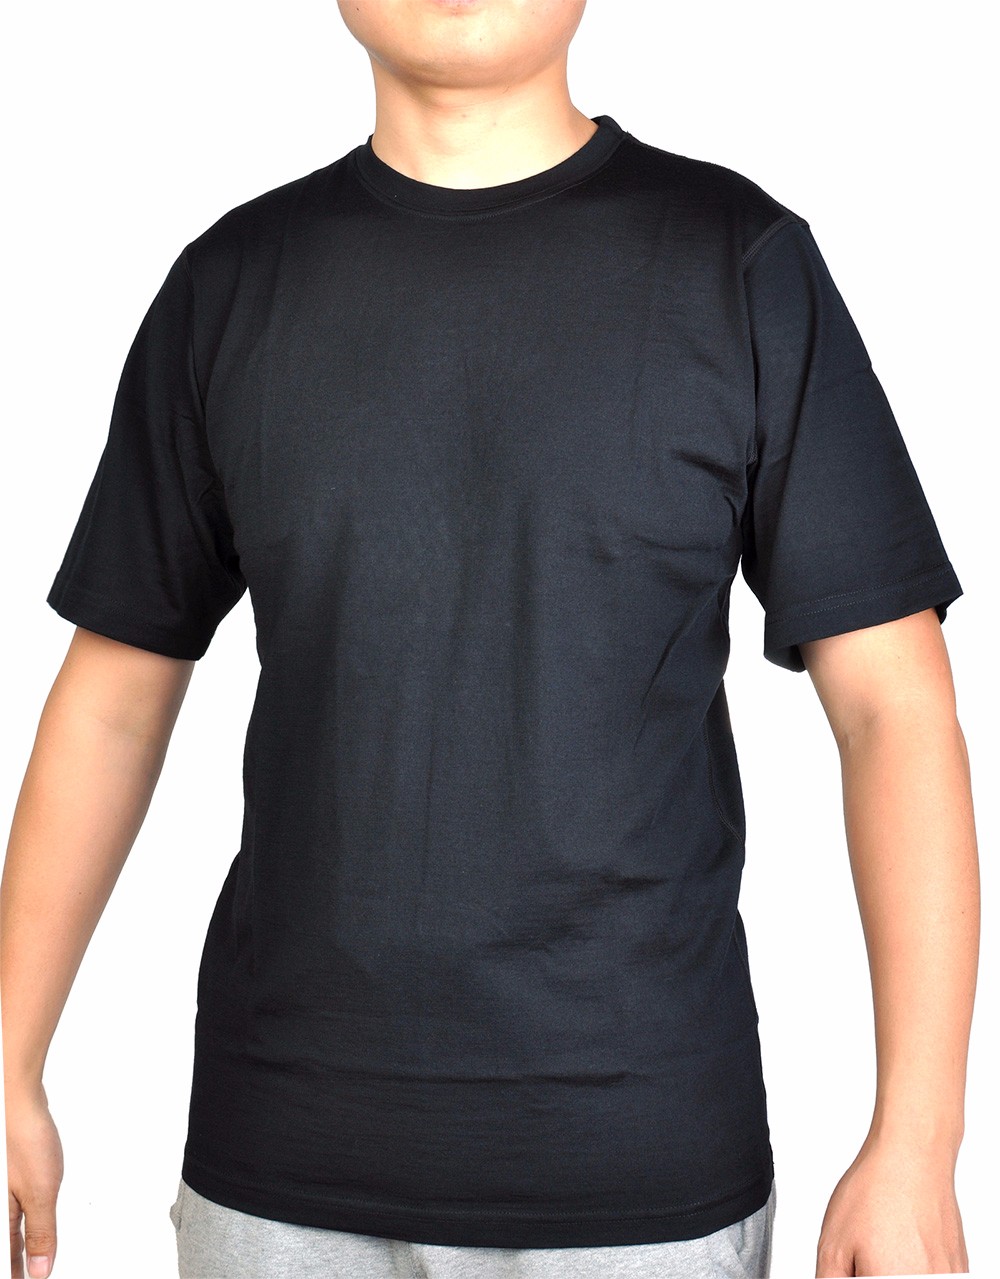 Men39s-100-Merino-Wool-Out-door-Crew-T-Shirts-Lightweight-Athletics-Summer-Breathable-Wicking-Cool-S-1898720767